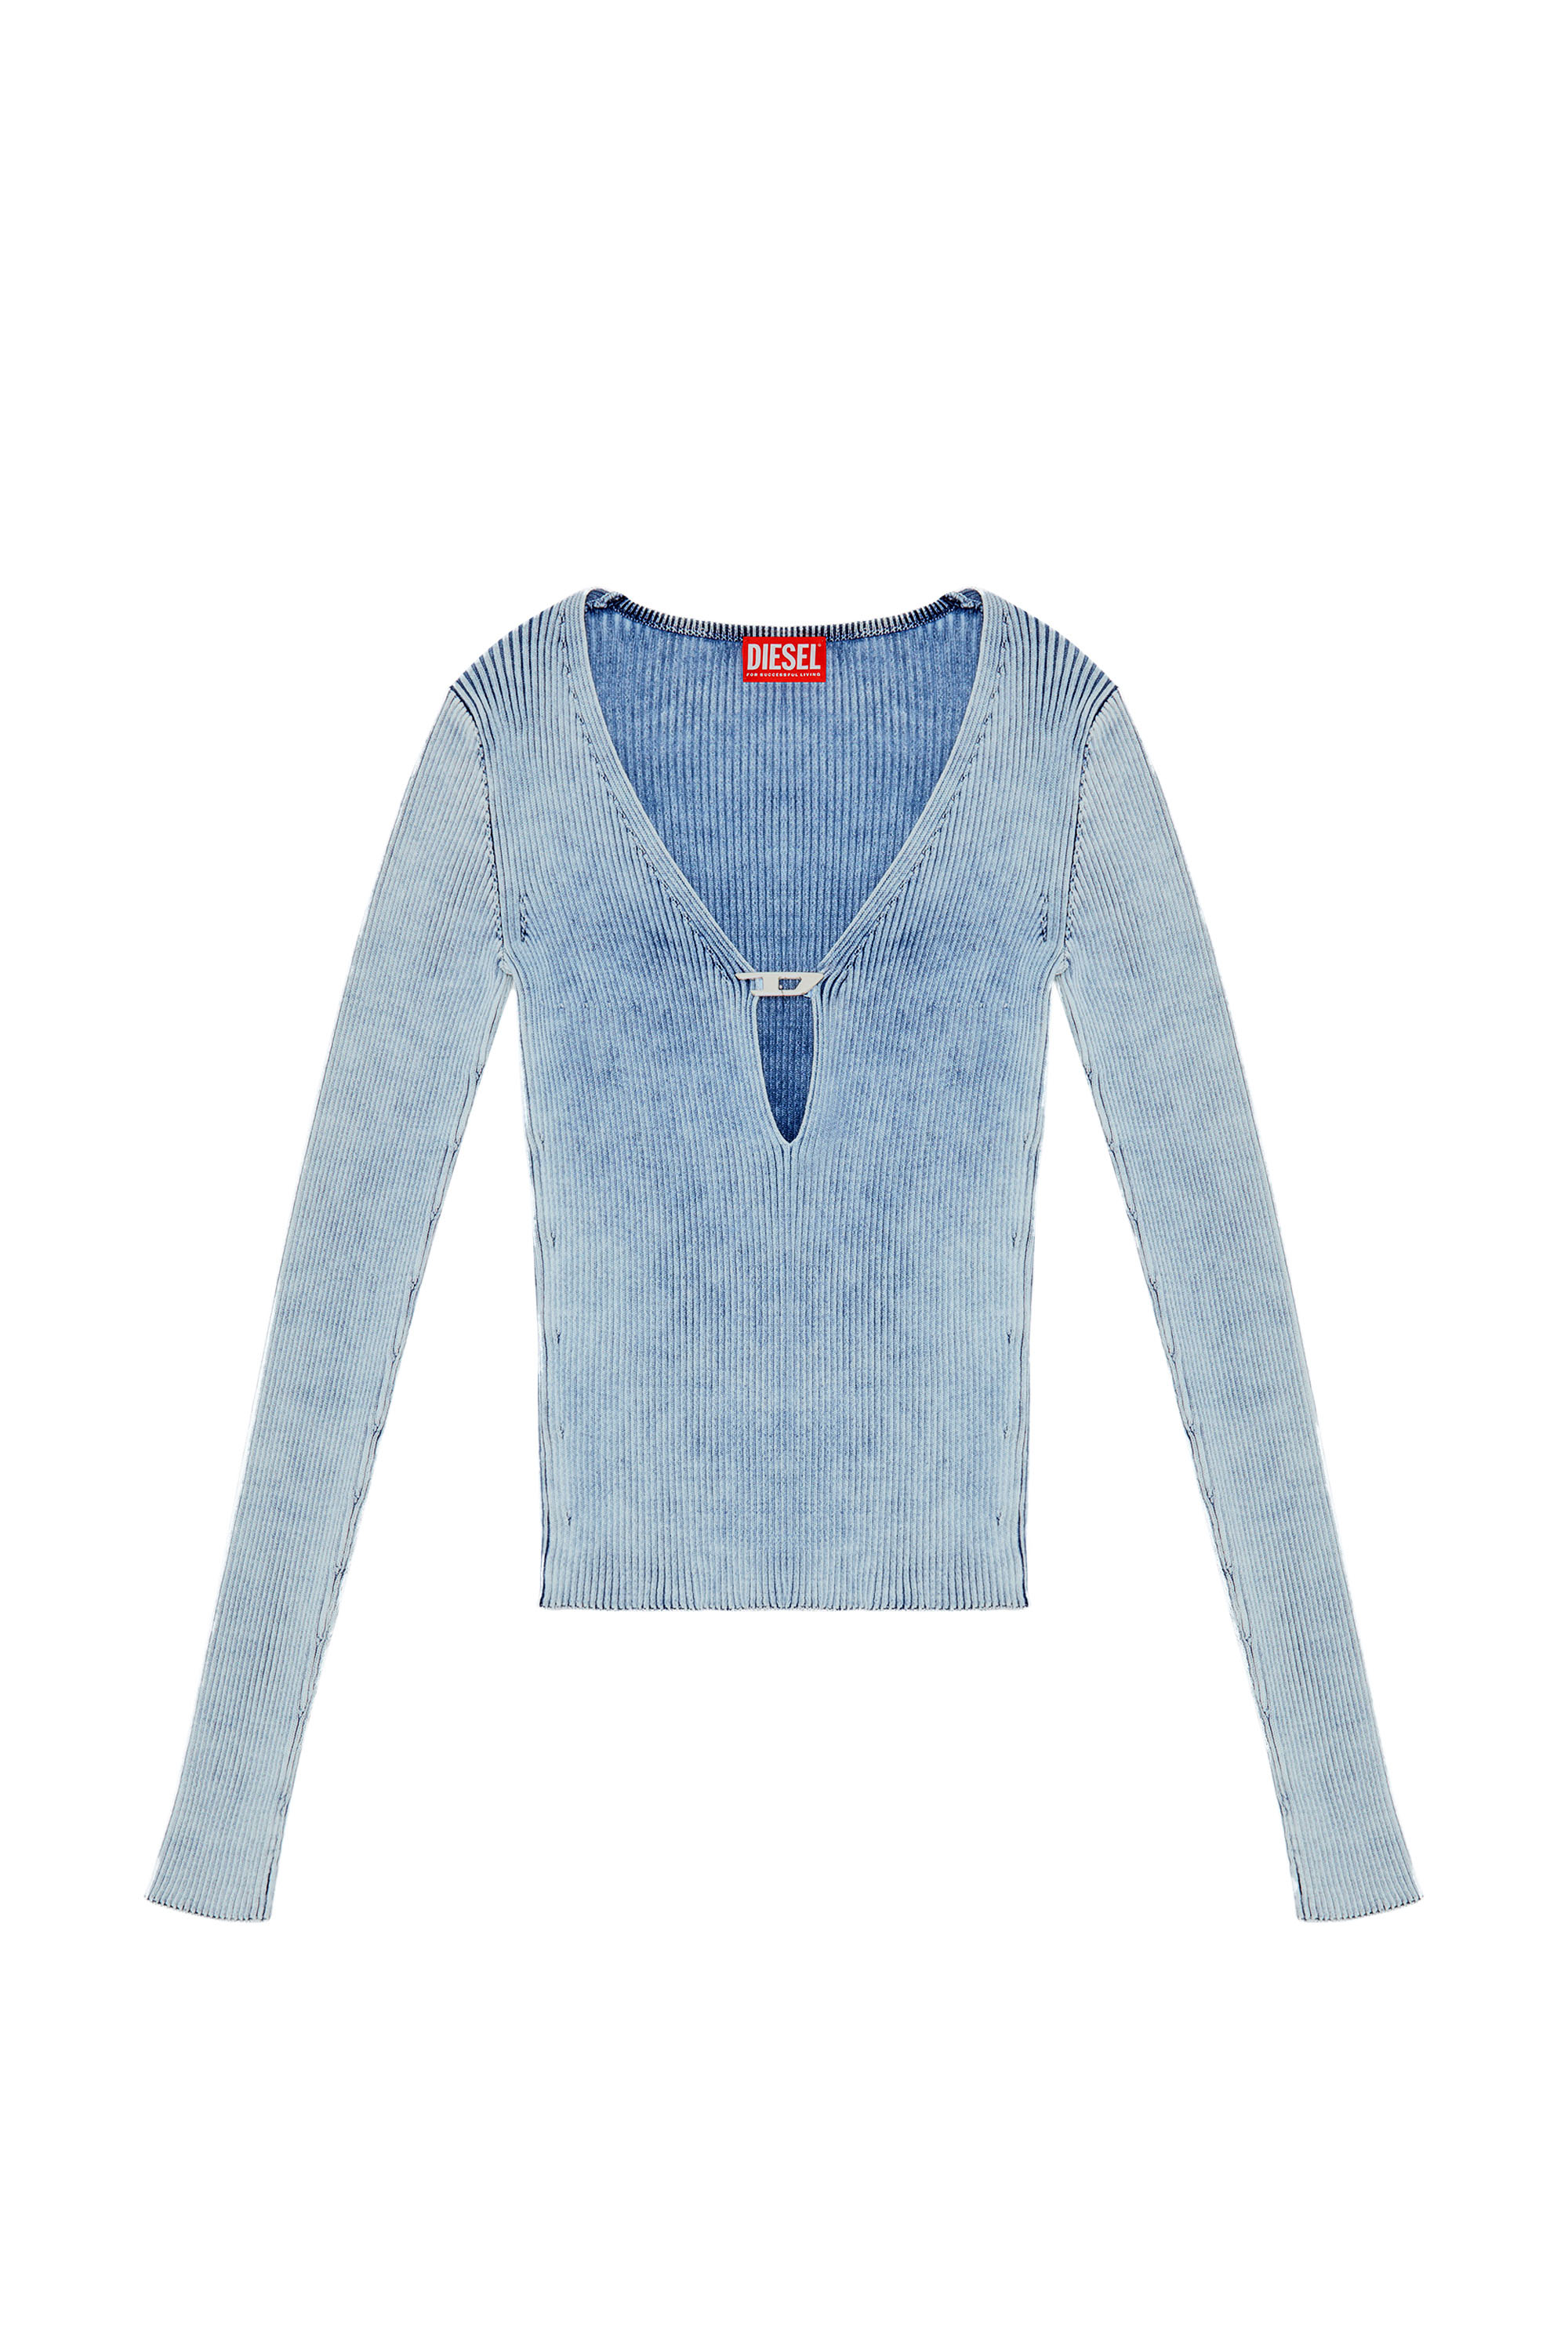 Diesel - M-TERI, Woman Cut-out top in indigo cotton knit in Blue - Image 5